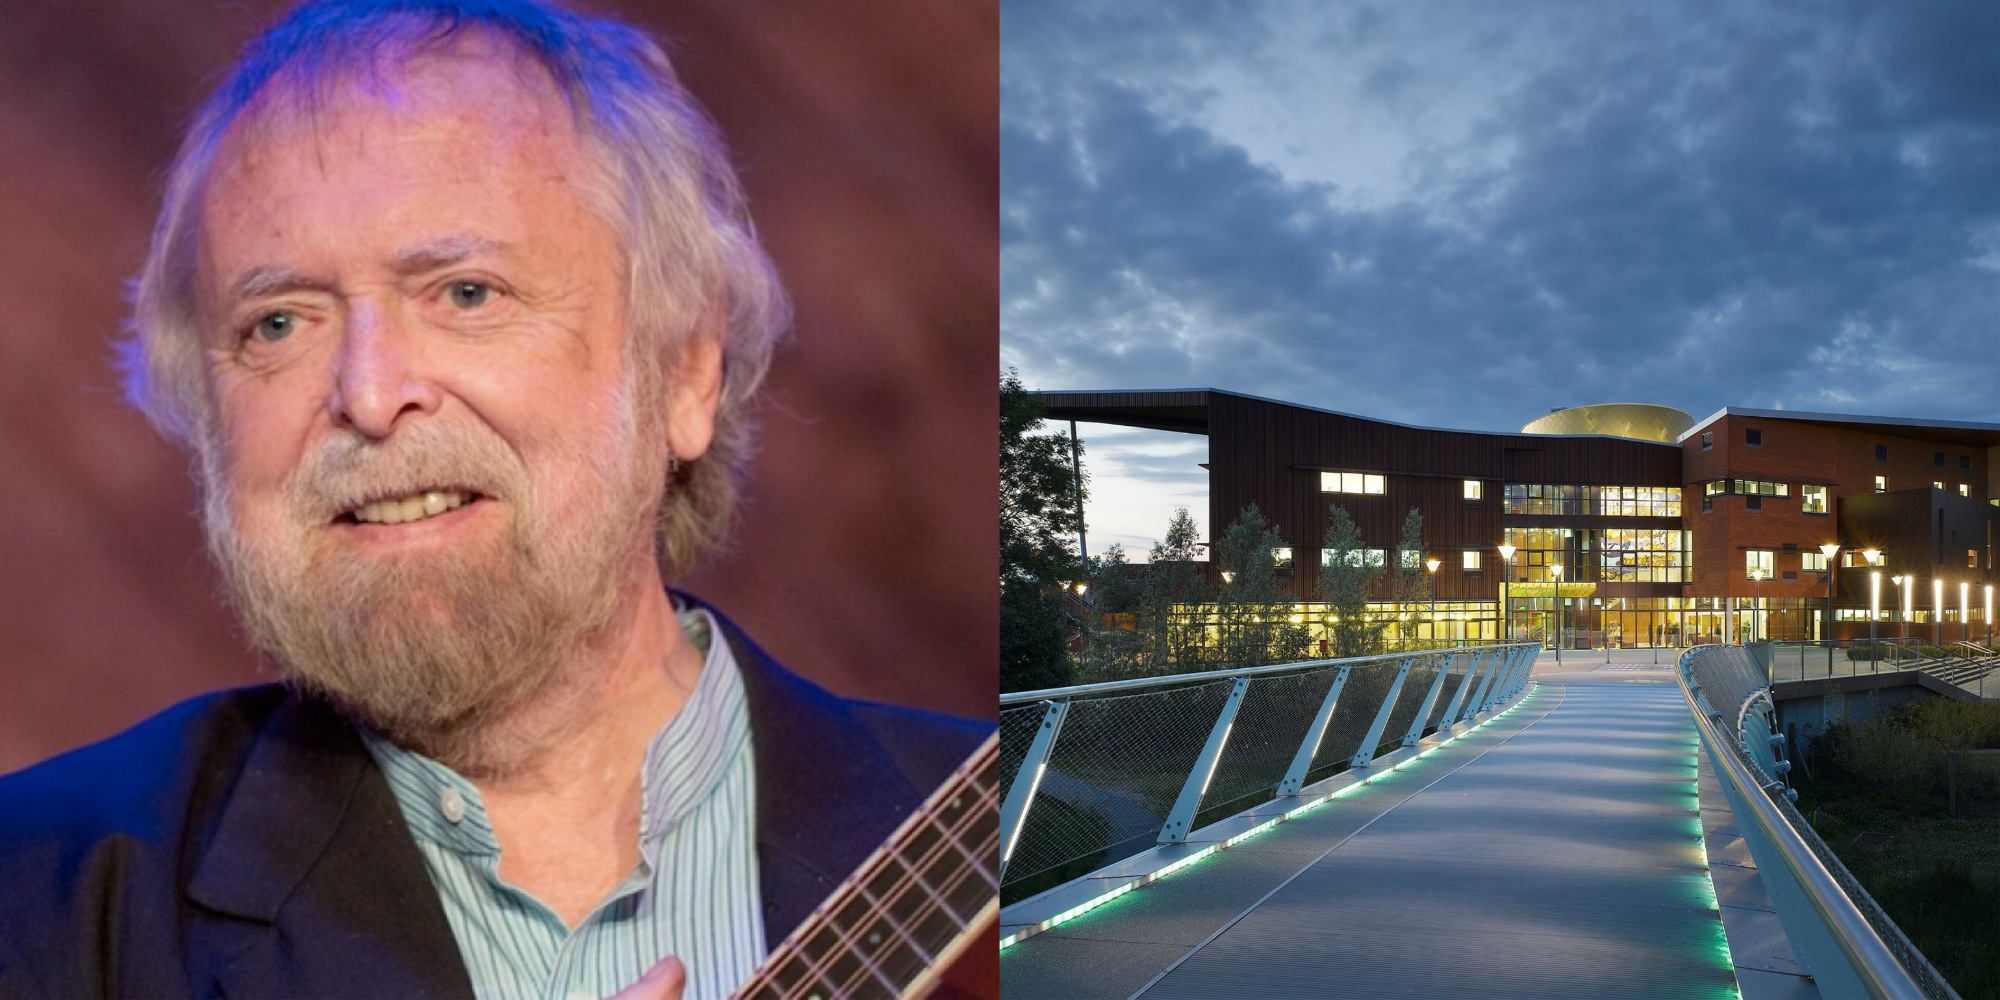 Memorial Event for Renowned Musician and Folklorist Prof Mick Moloney held in Irish World Academy of Music and Dance, University of Limerick